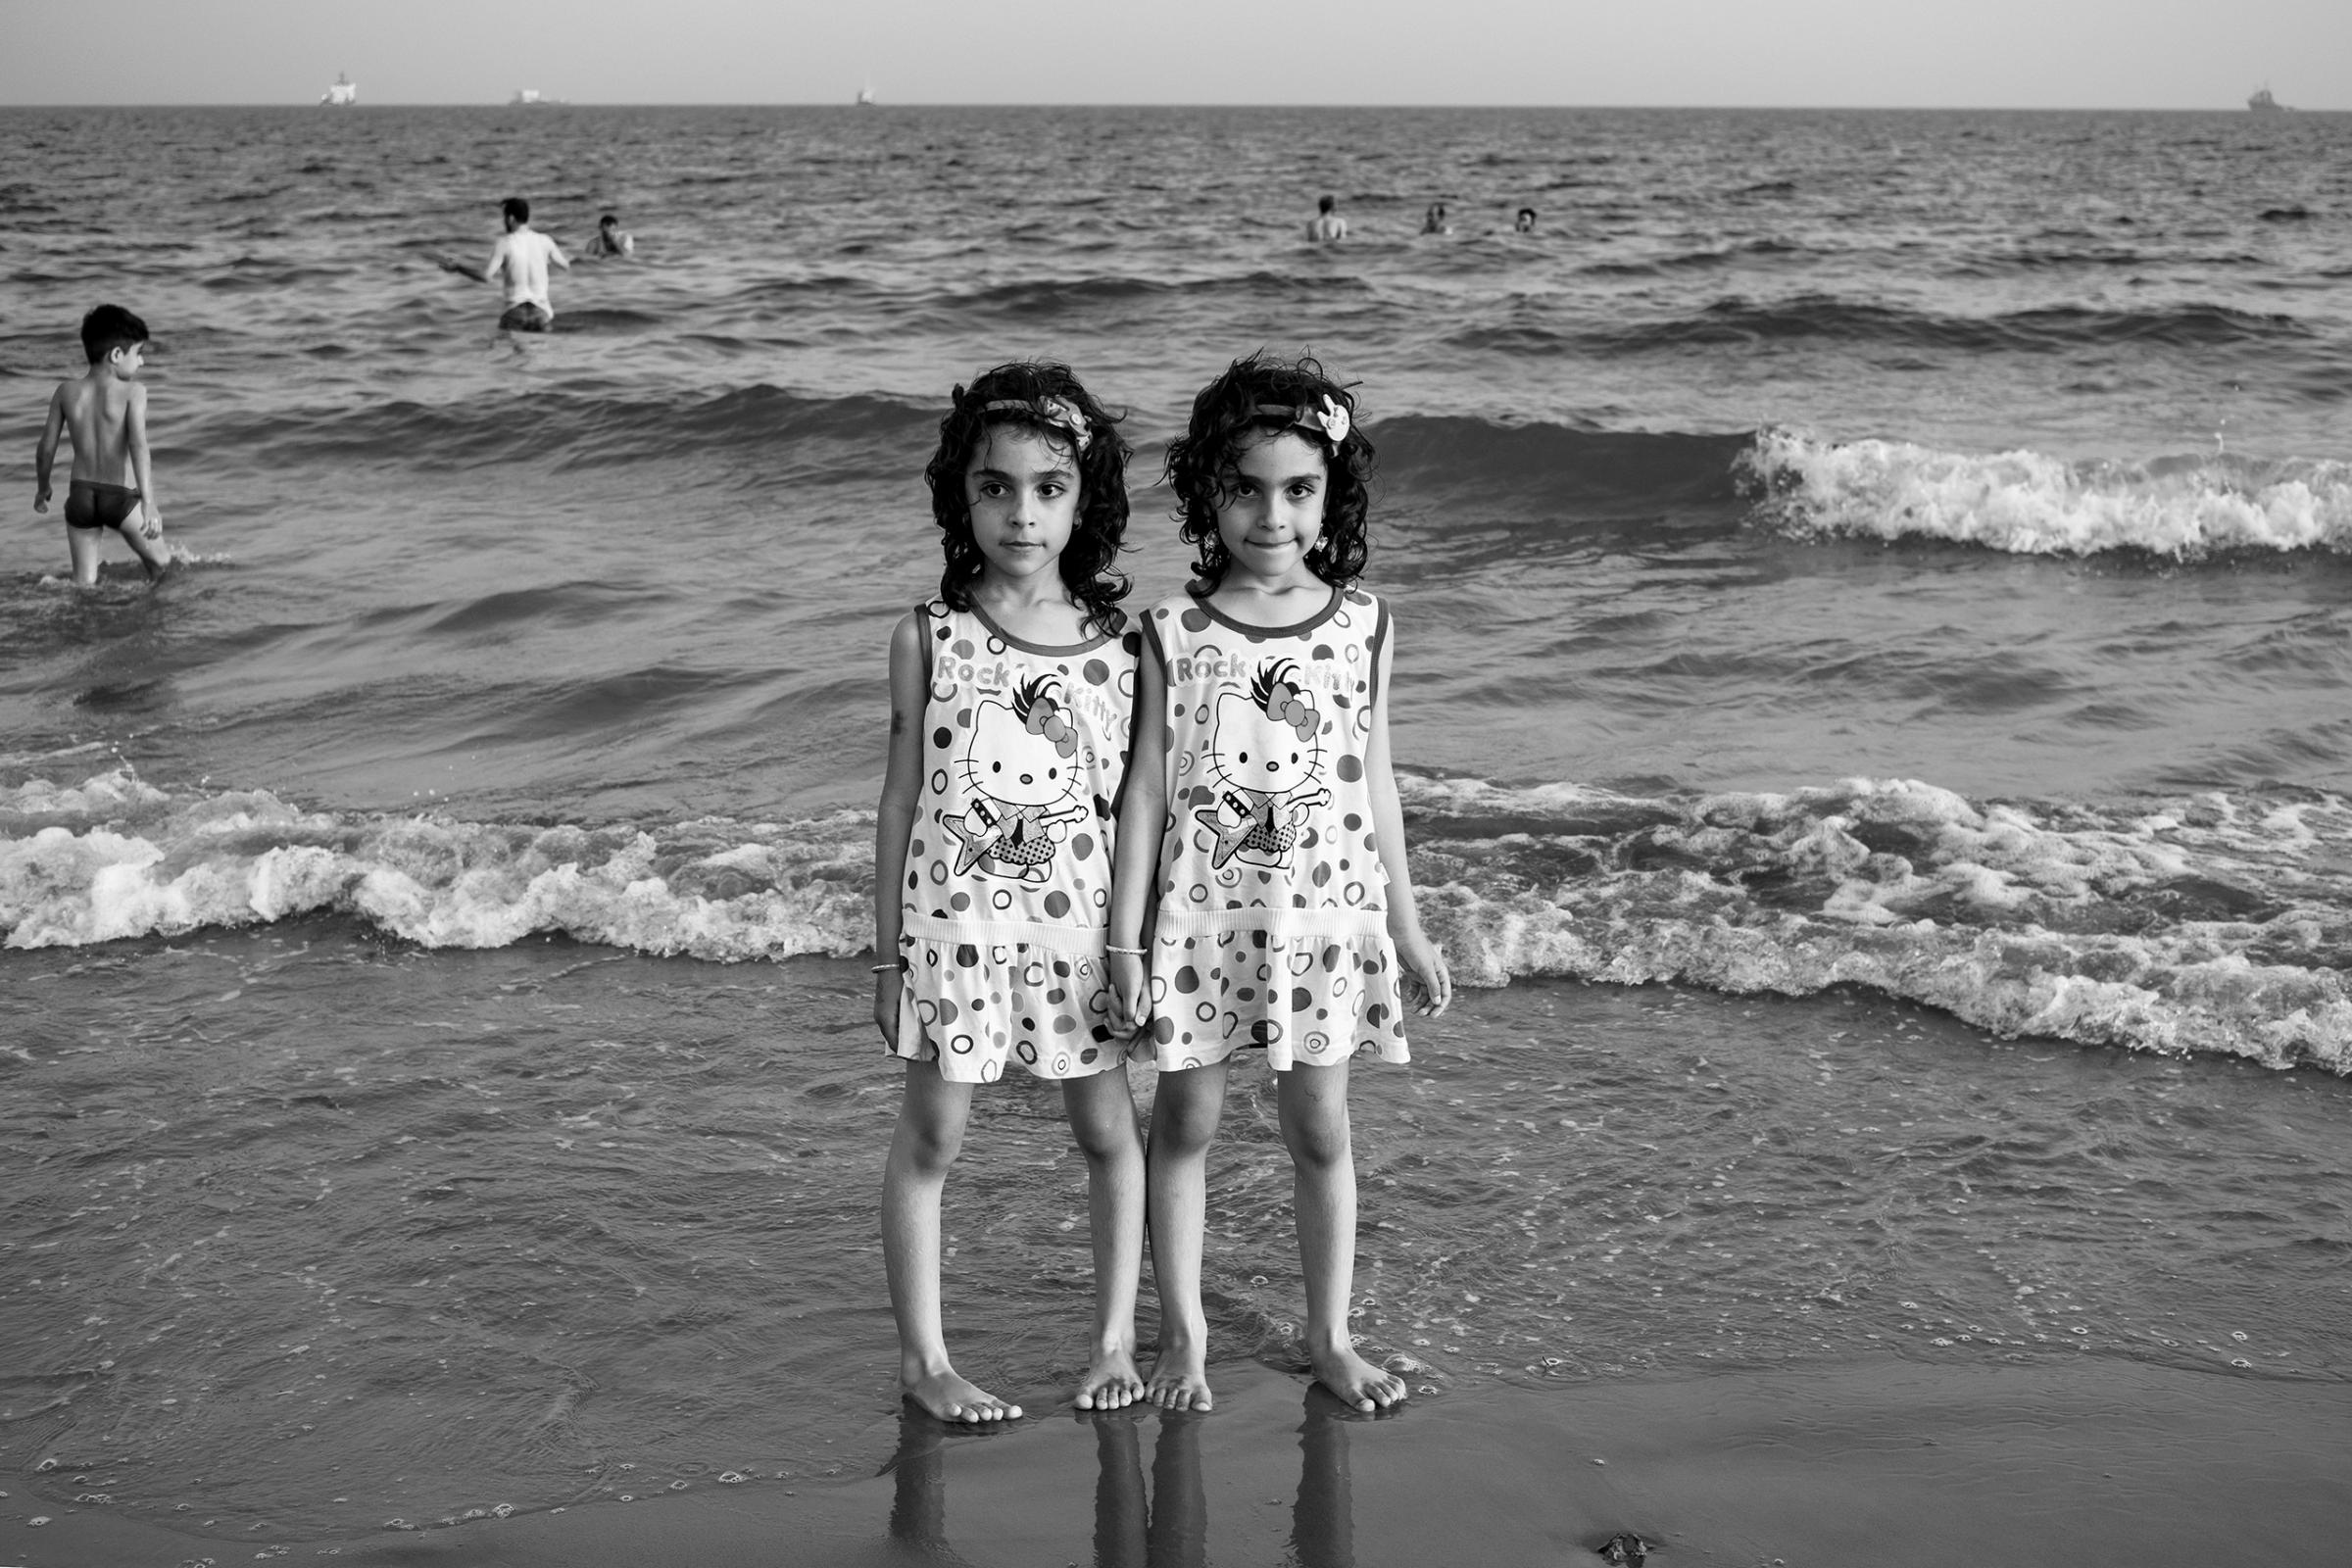 Twins escape from high temperatures  at the seaside of Dayyer, Iran.  According to scientists, by 2070, if worldwide emissions arenÕt sufficiently reduced, the Persian Gulf will experience heat waves that will be impossible for many humans to survive, May 2016.